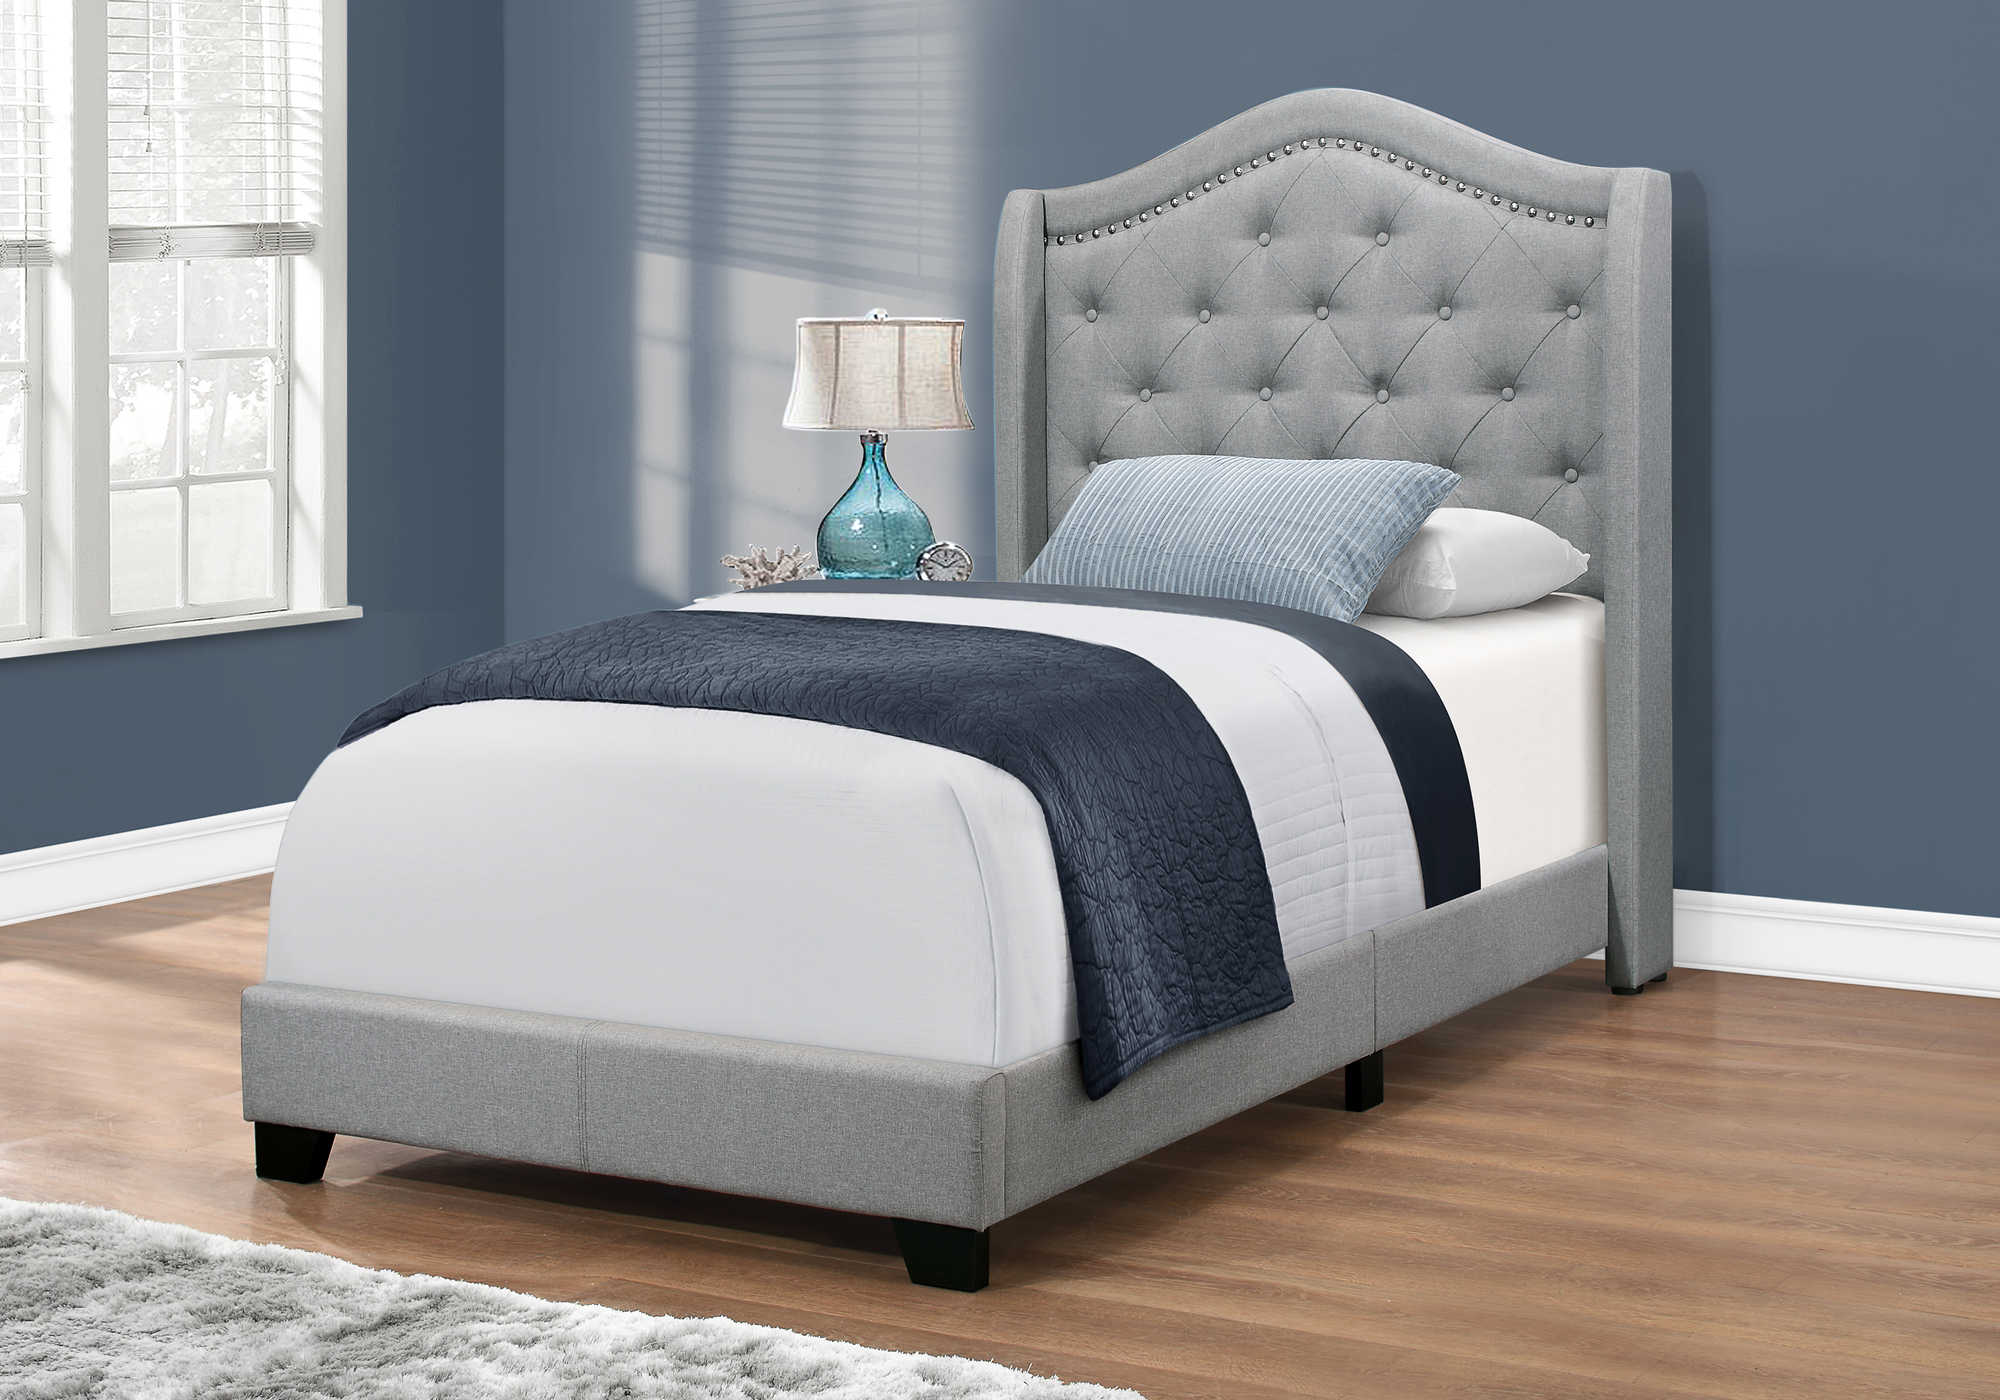 BED - TWIN SIZE / GREY LINEN WITH CHROME TRIM